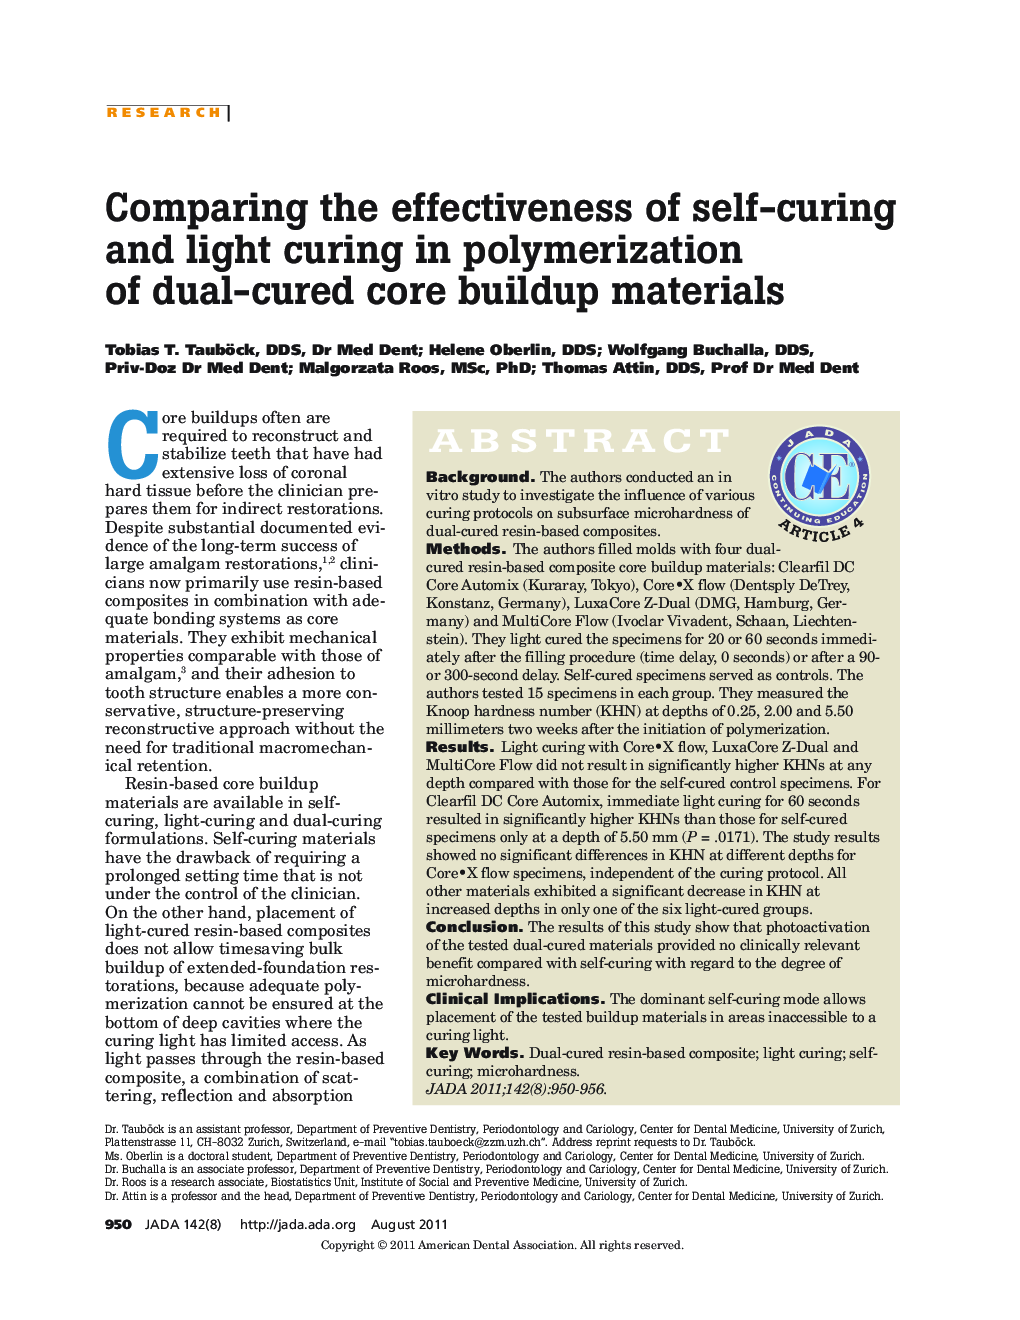 Comparing the effectiveness of self-curing and light curing in polymerization of dual-cured core buildup materials